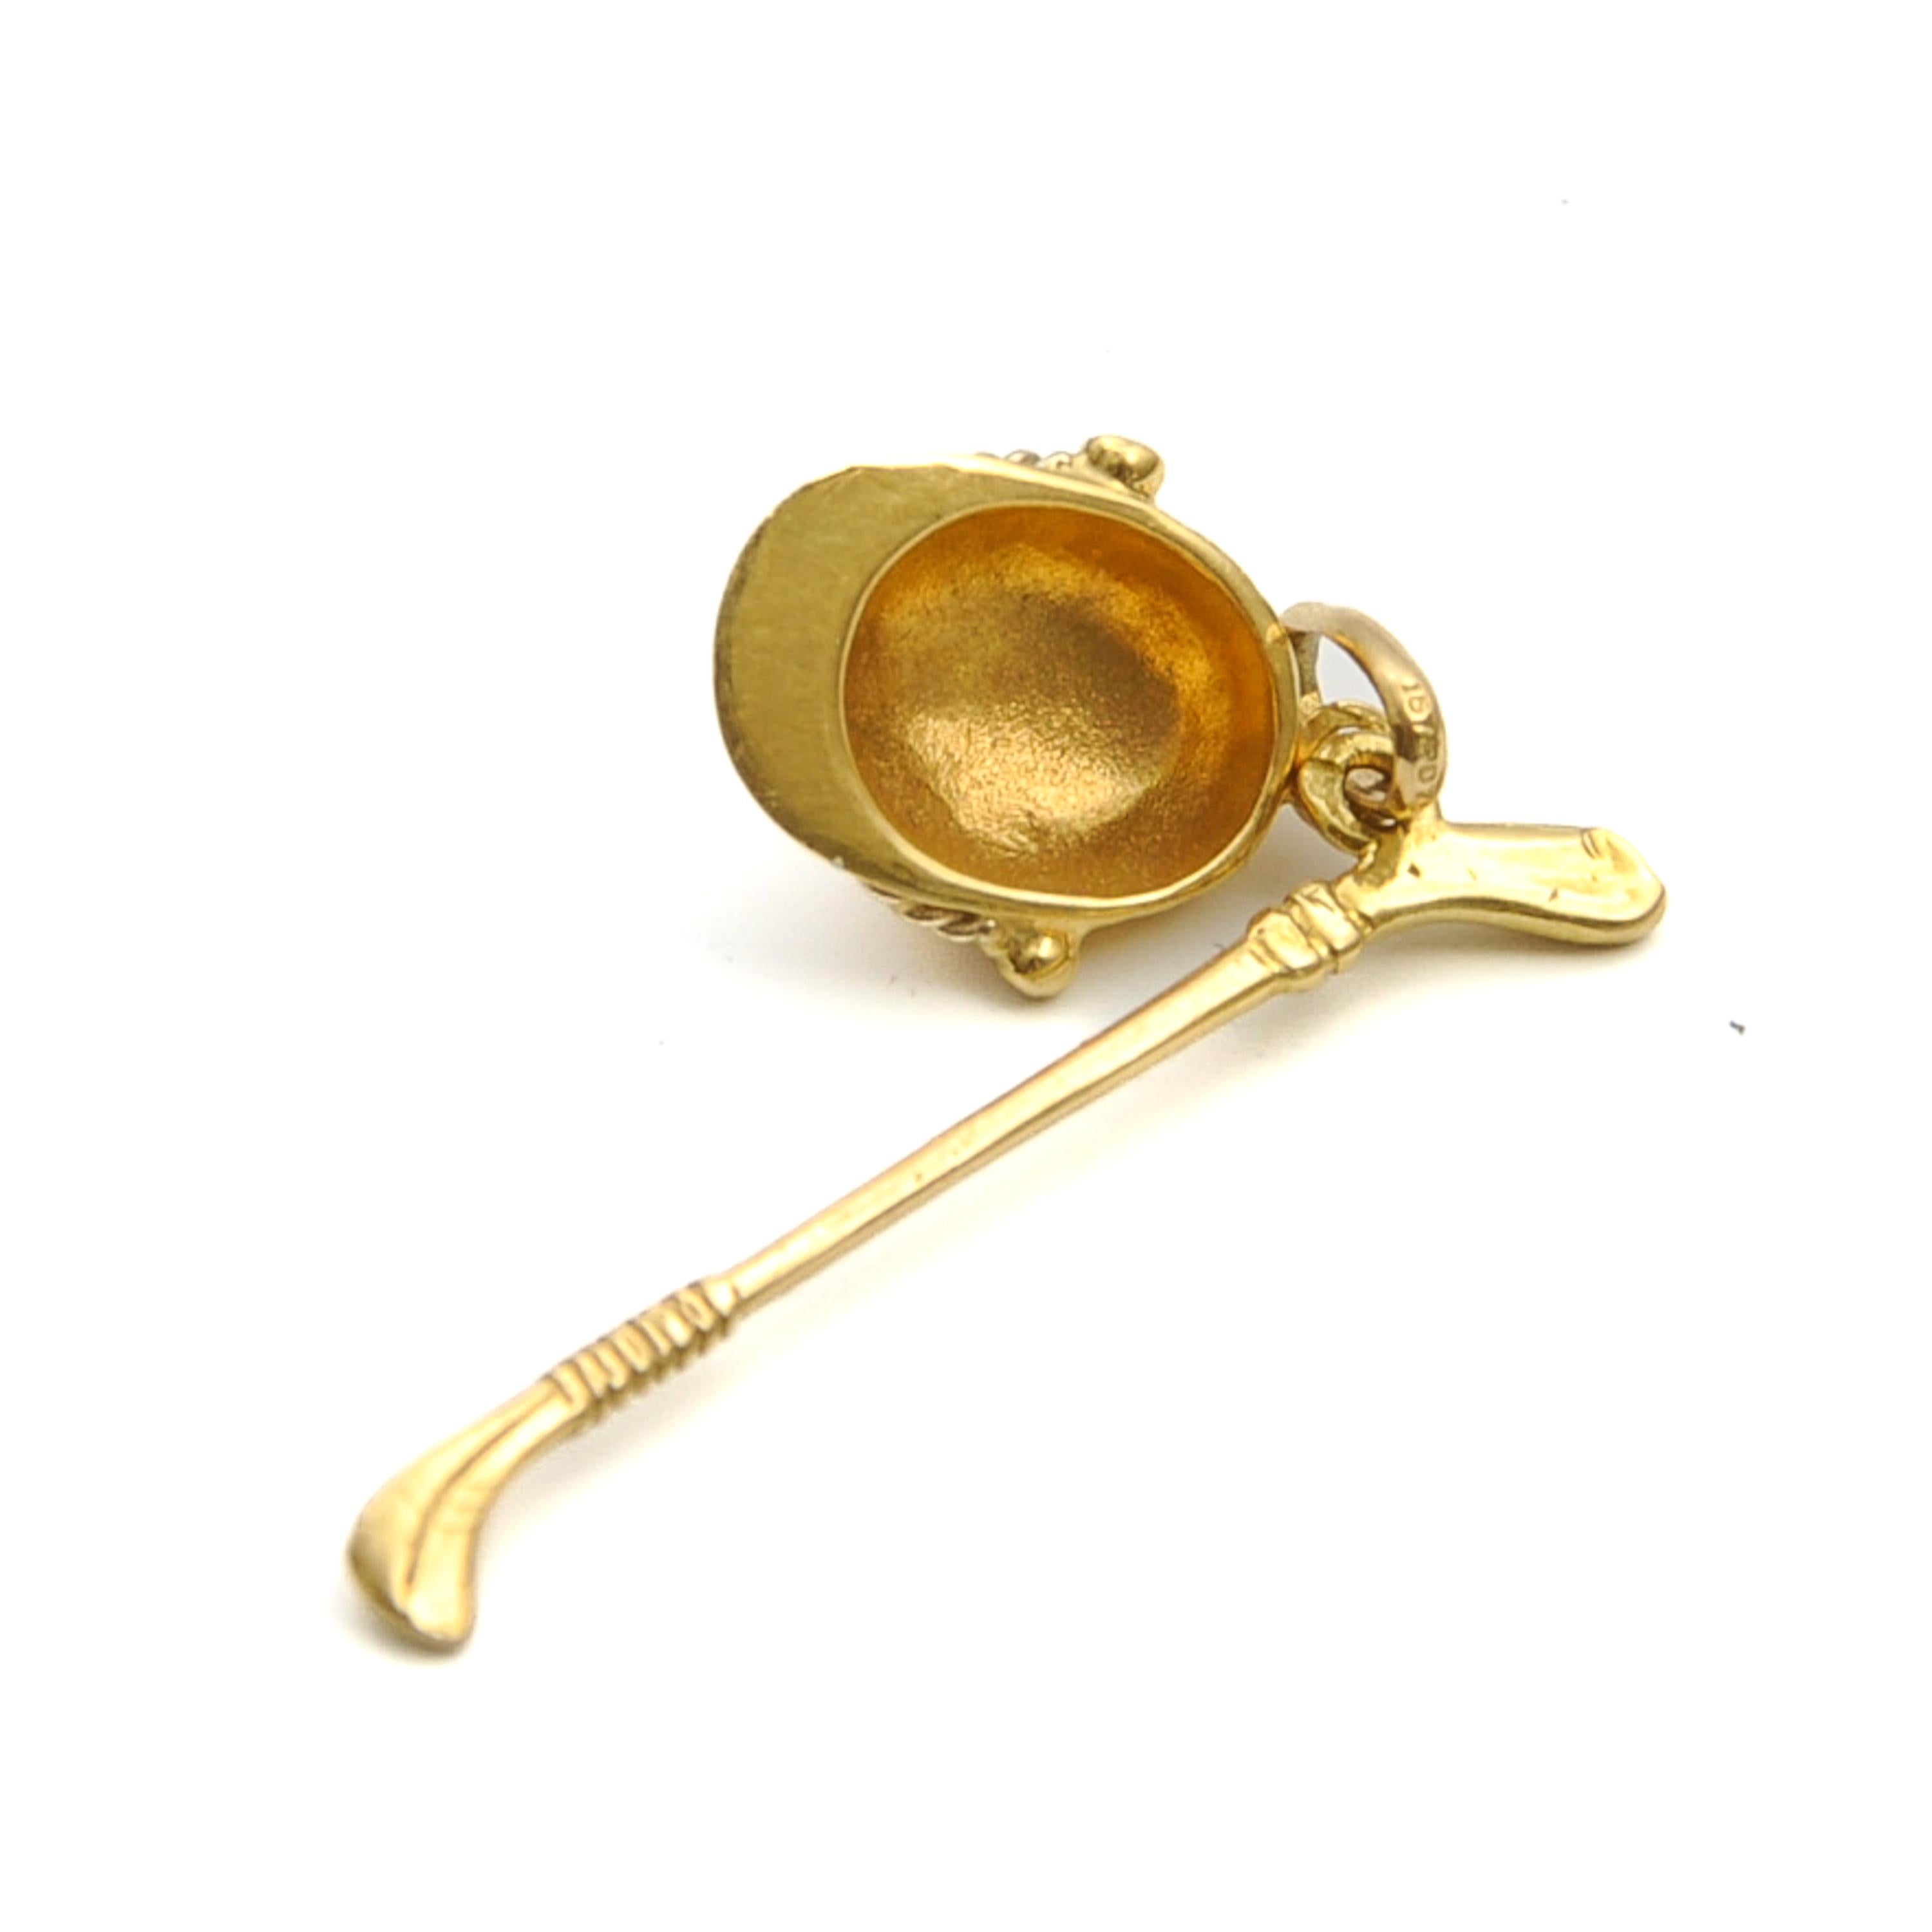 Vintage 18K Gold Polo Riding Helmet and Polo Stick Charm Pendant In Good Condition For Sale In Rotterdam, NL